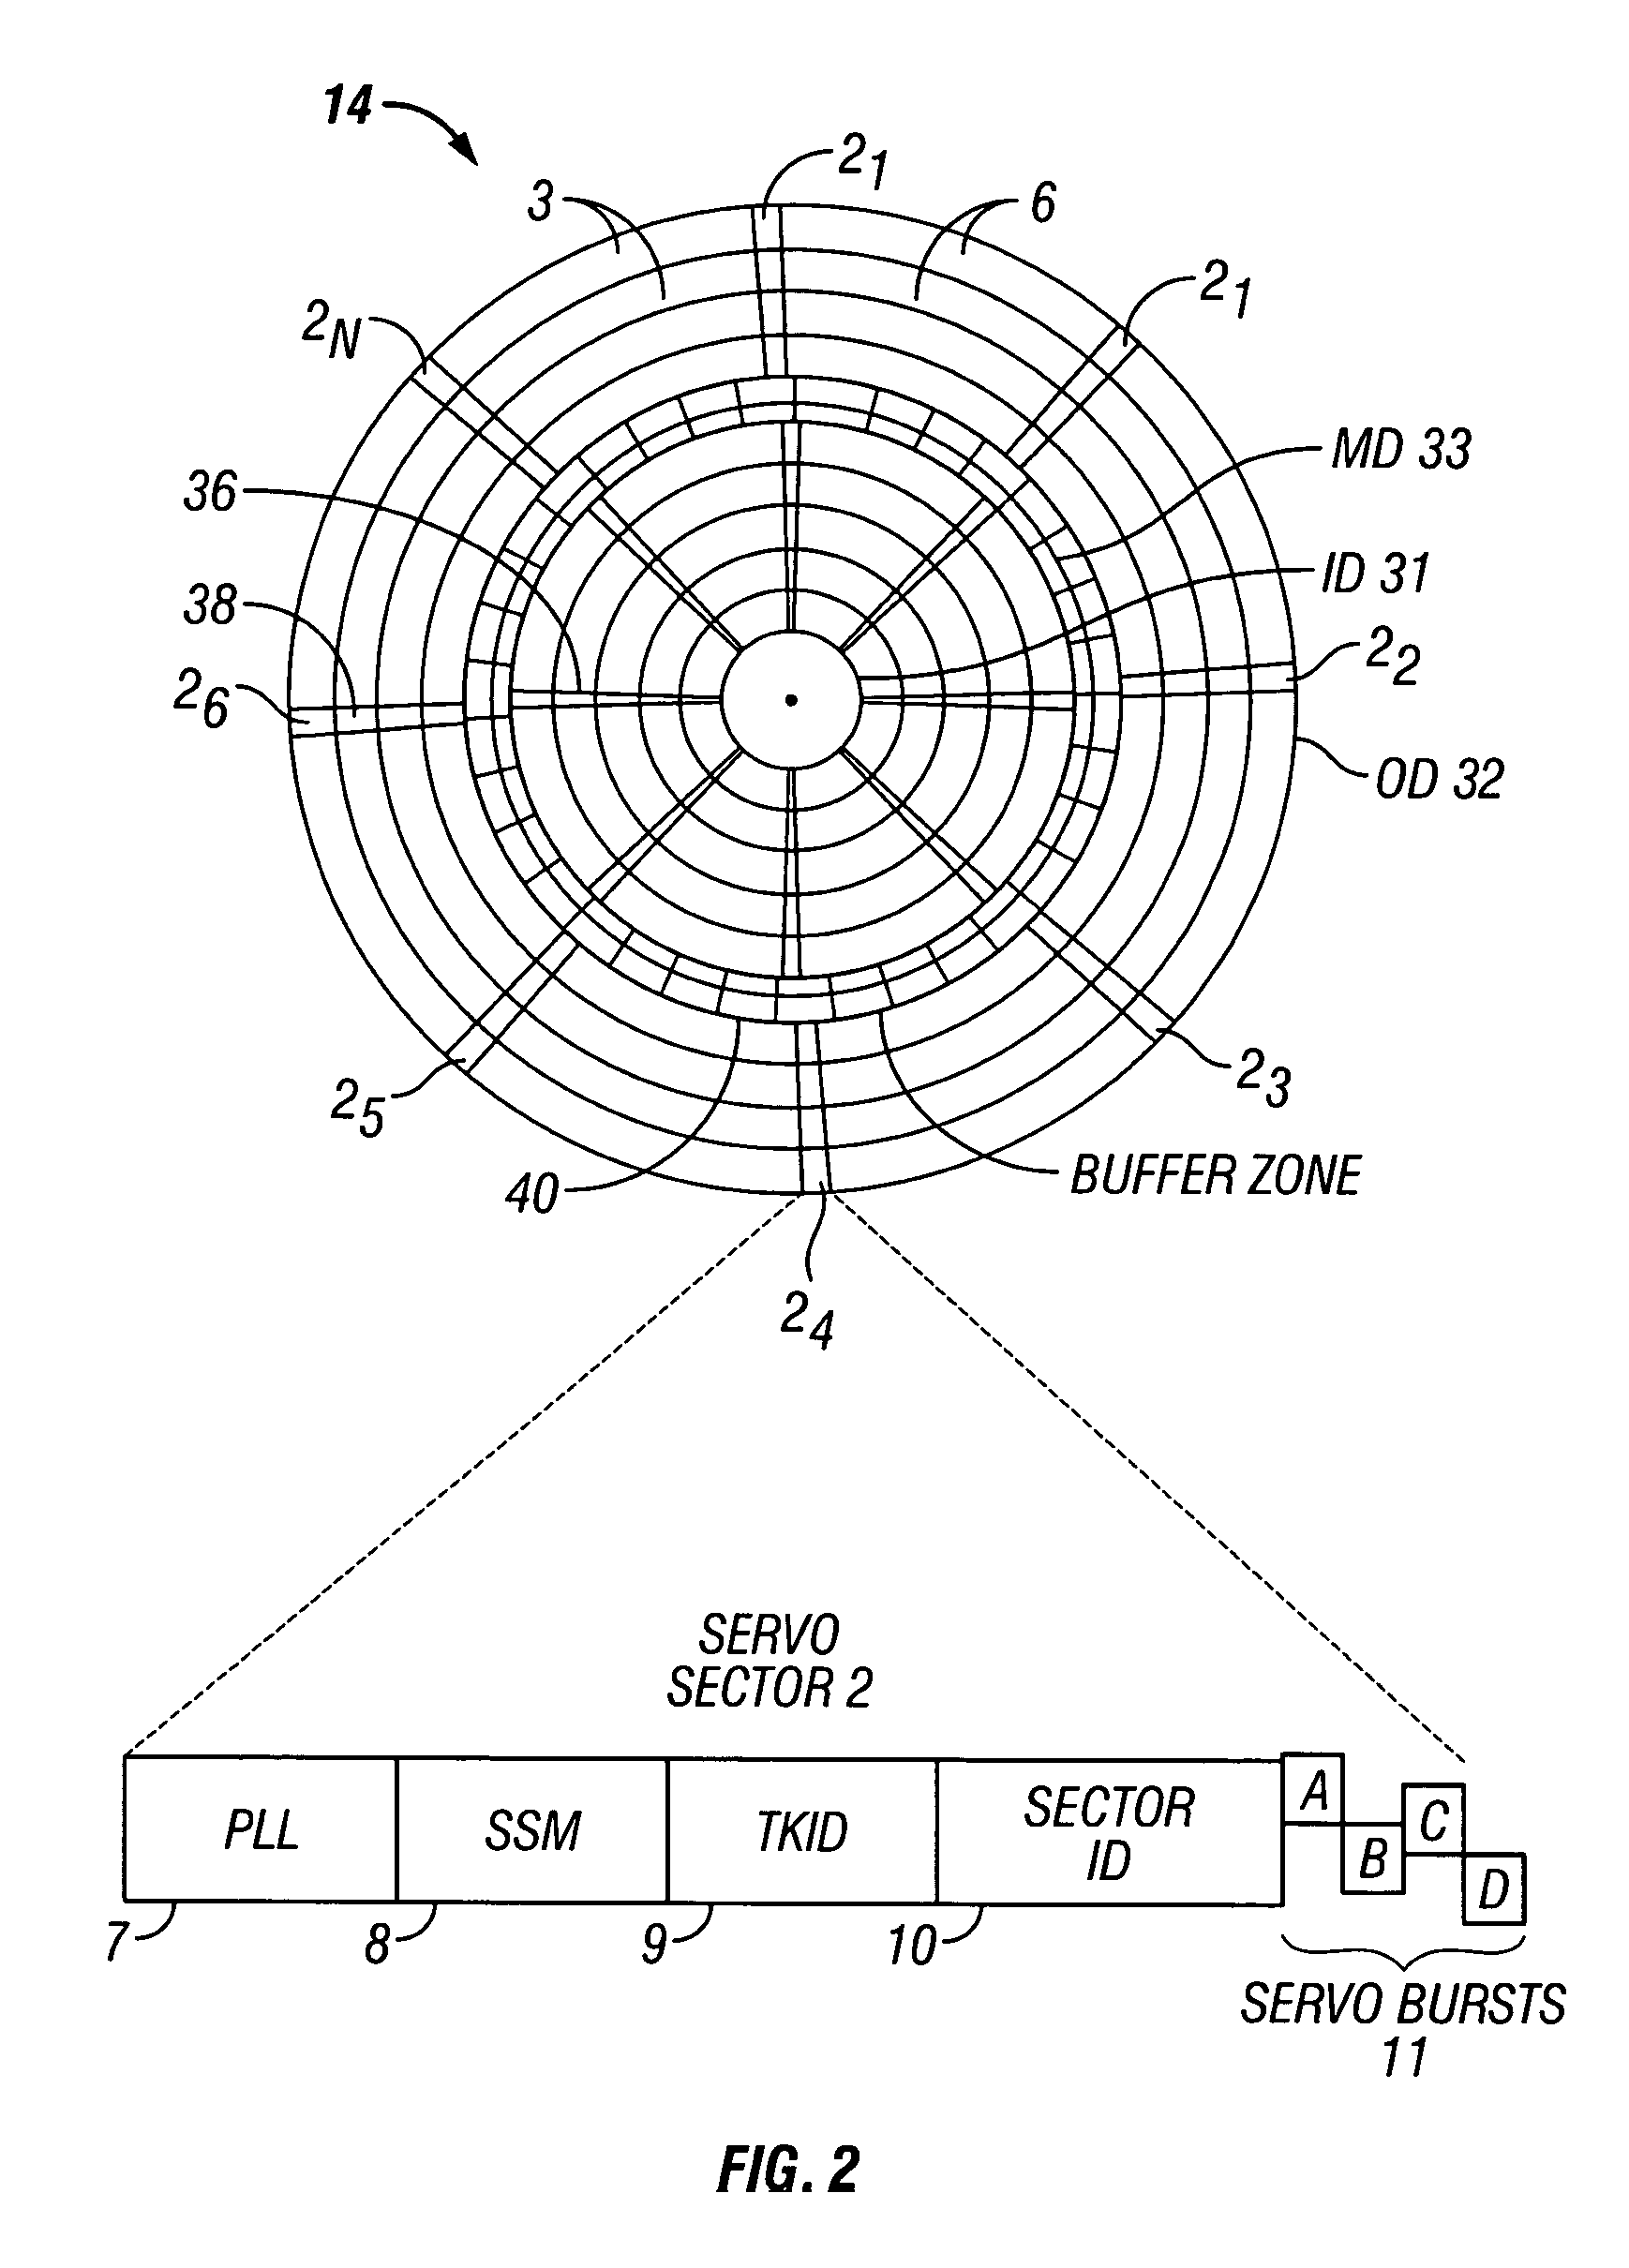 Disk drive operable with first and second servo patterns in a perpendicular media recording environment